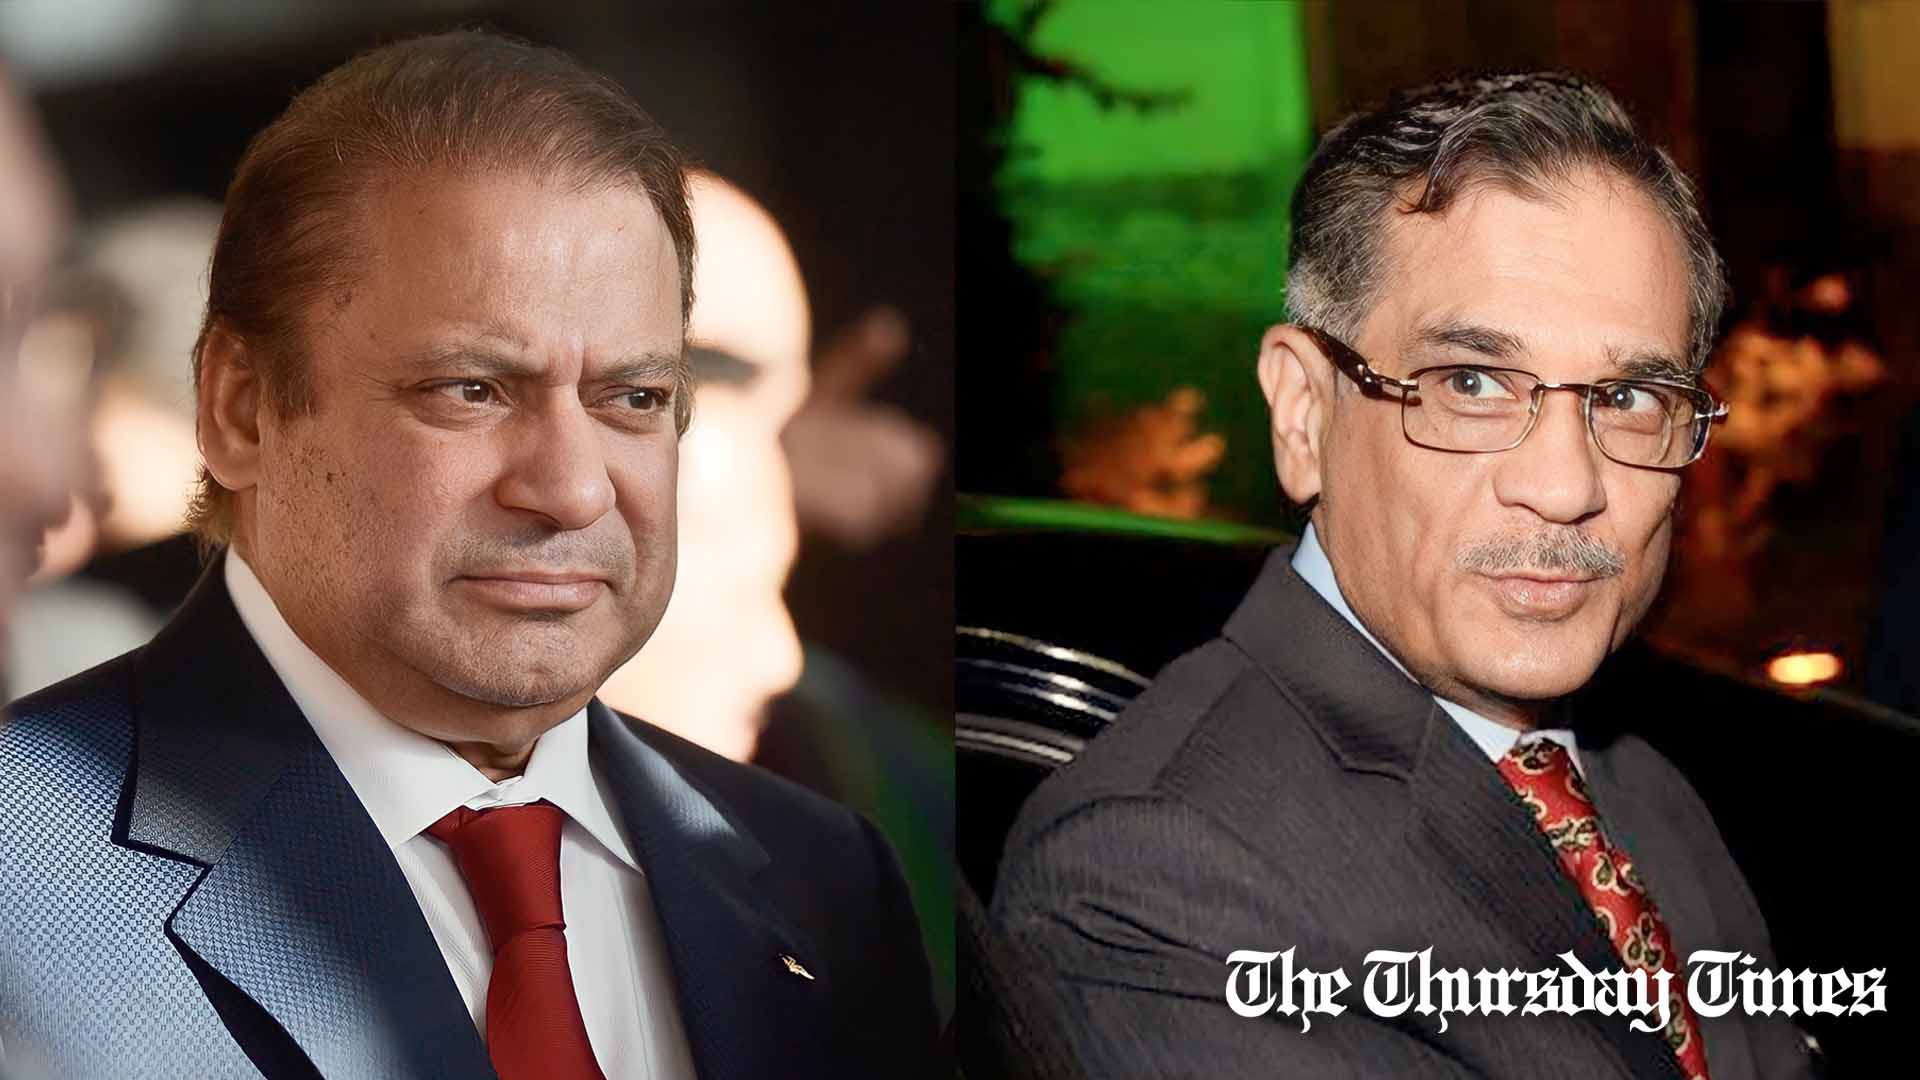 A combined file photo is shown of former prime minister Nawaz Sharif (L) and former Chief Justice of the Supreme Court of Pakistan Saqib Nisar (R). — FILE/THE THURSDAY TIMES